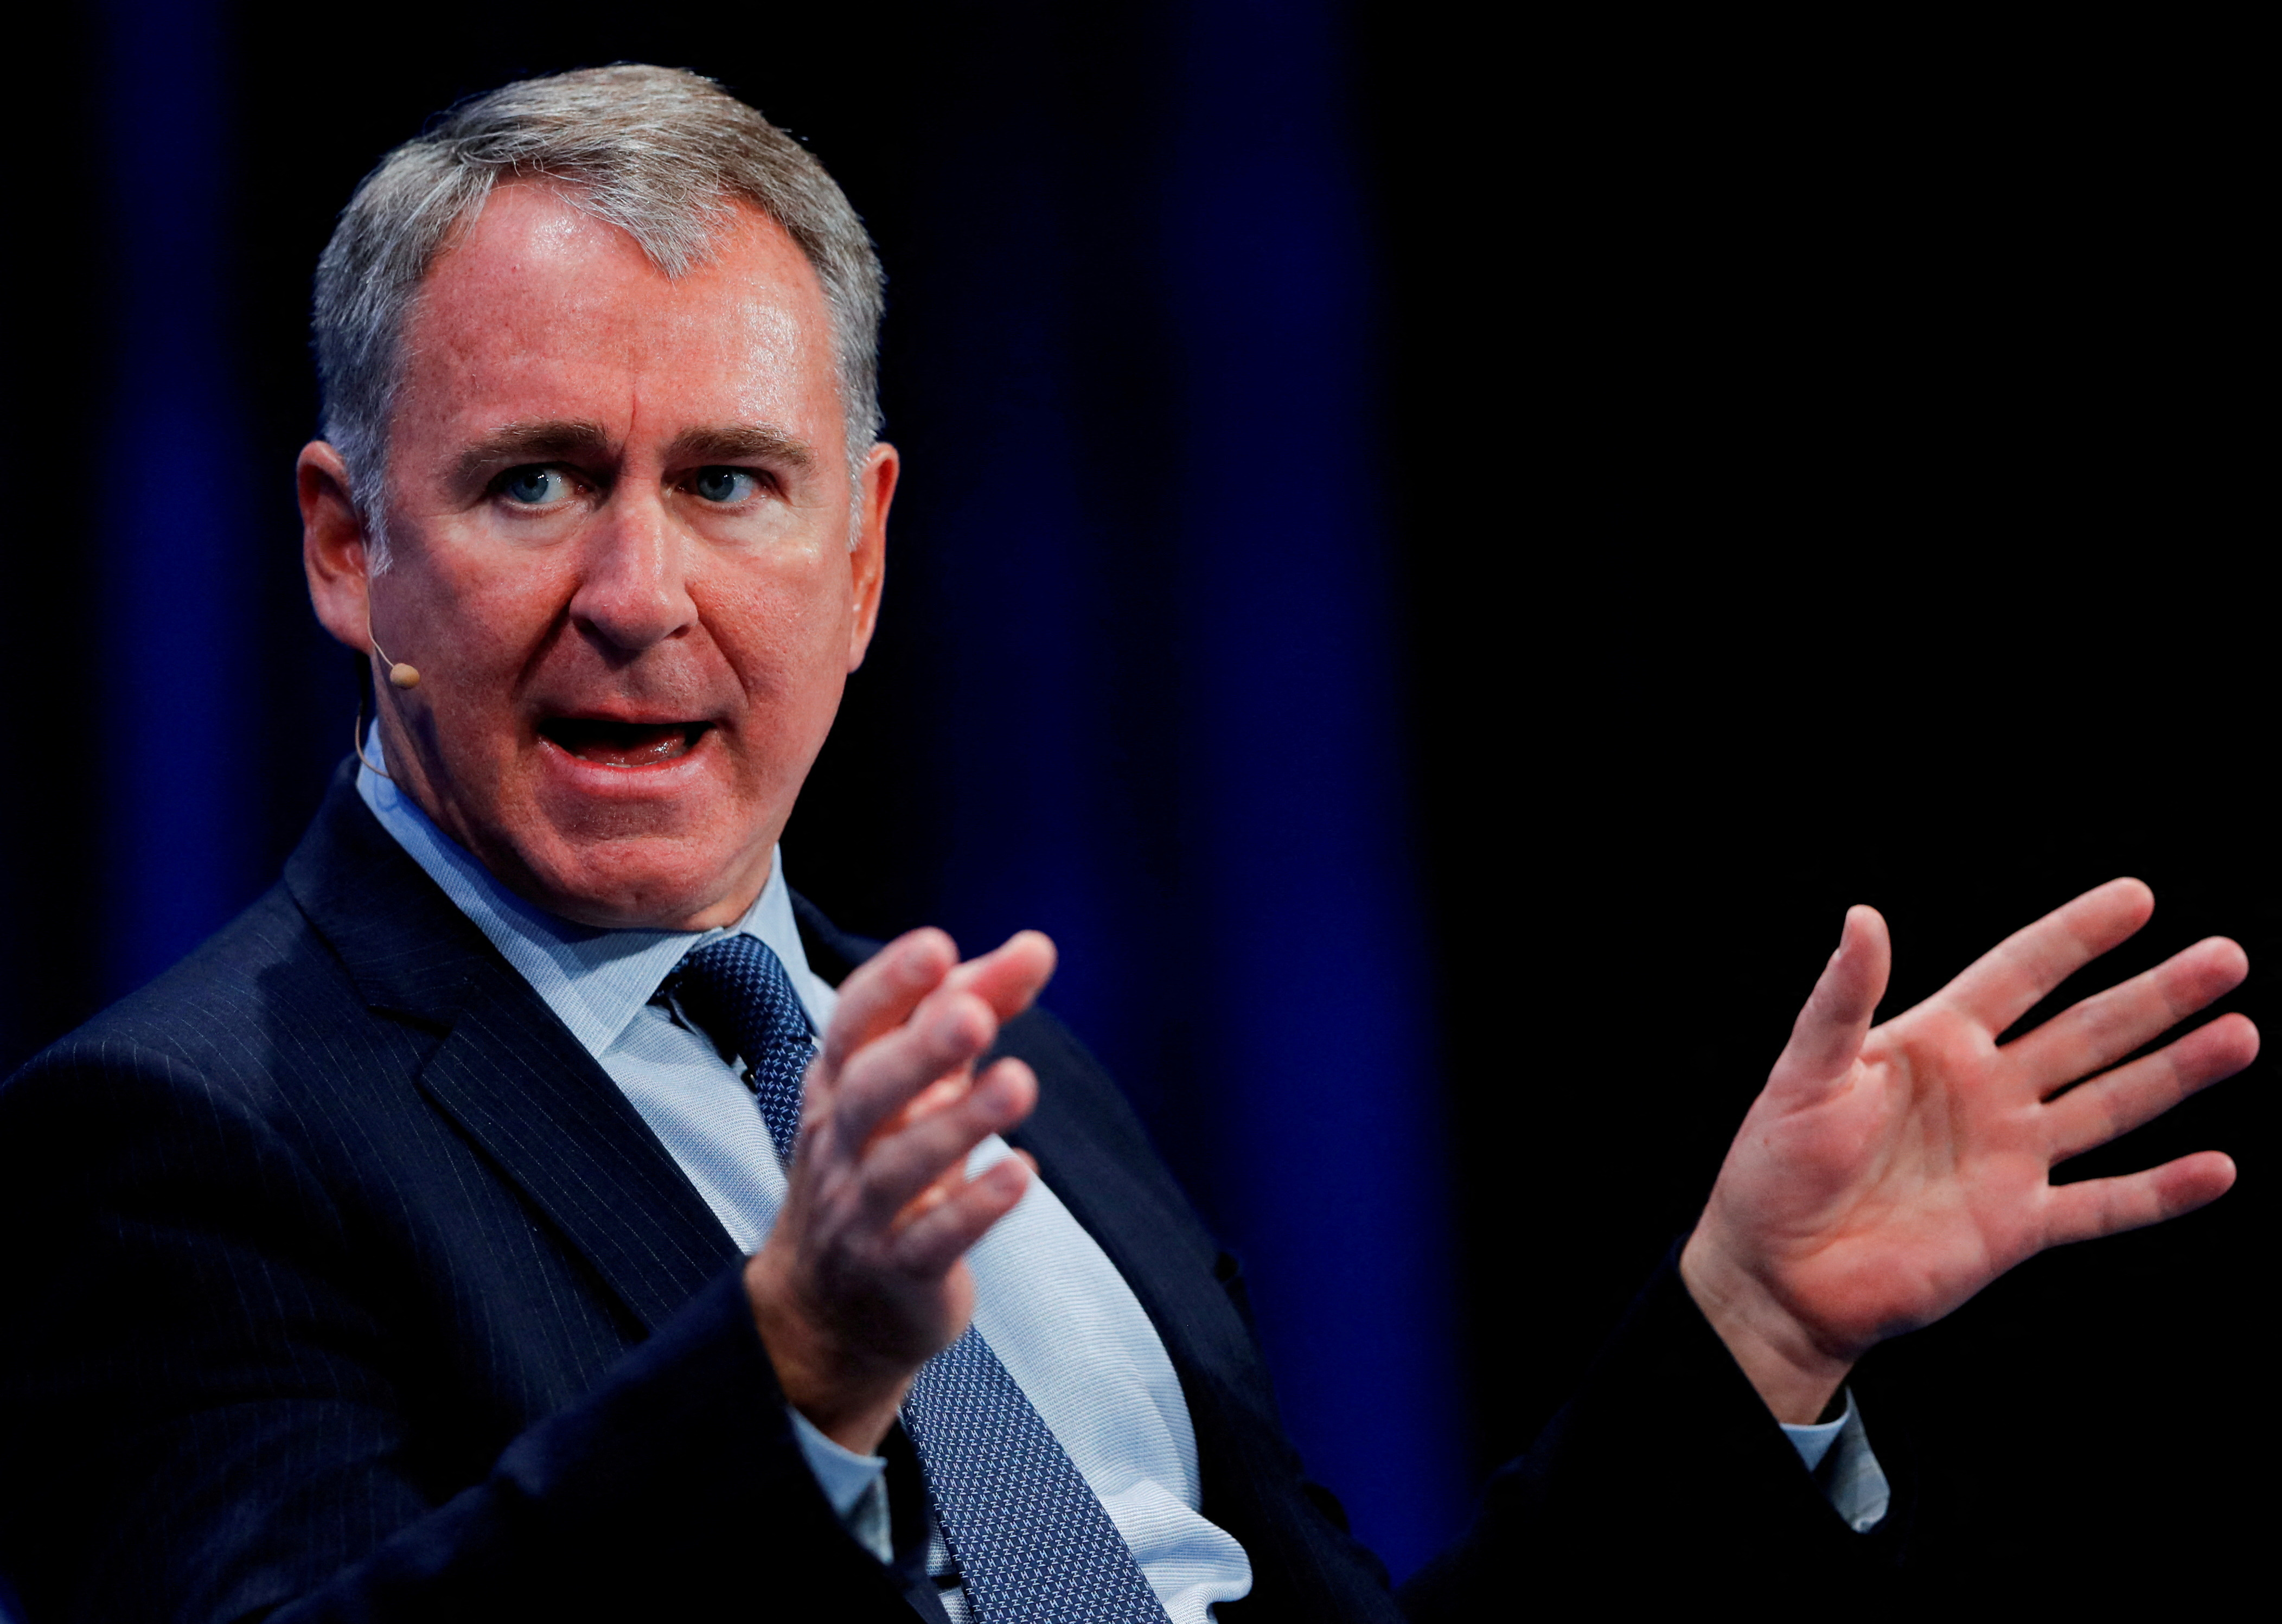 FILE PHOTO: Ken Griffin, Founder and CEO, Citadel, speaks during the Milken Institute's 22nd annual Global Conference in Beverly Hills, California